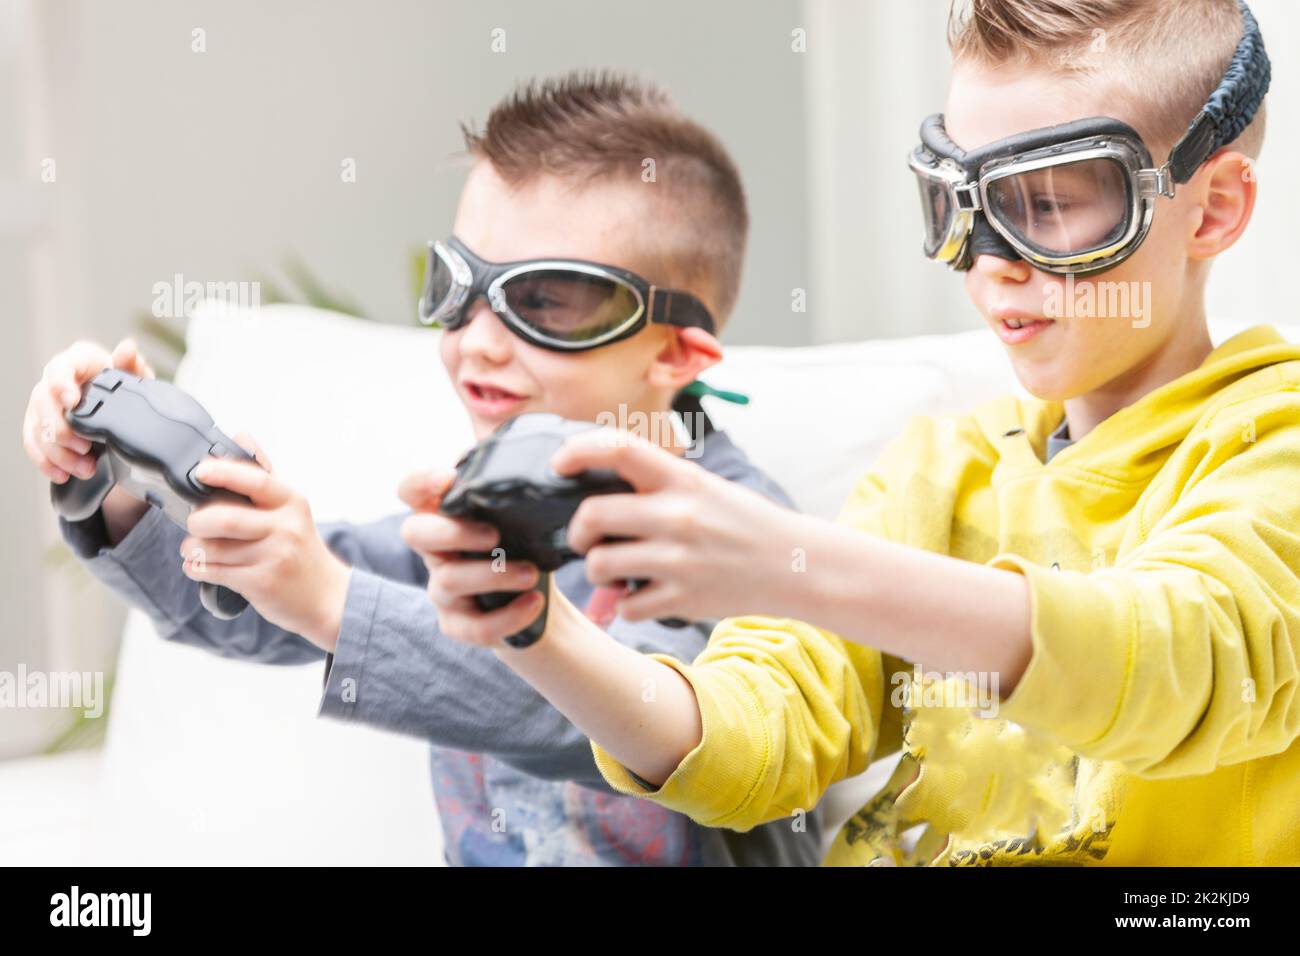 Two competitive young boys playing computer games Stock Photo